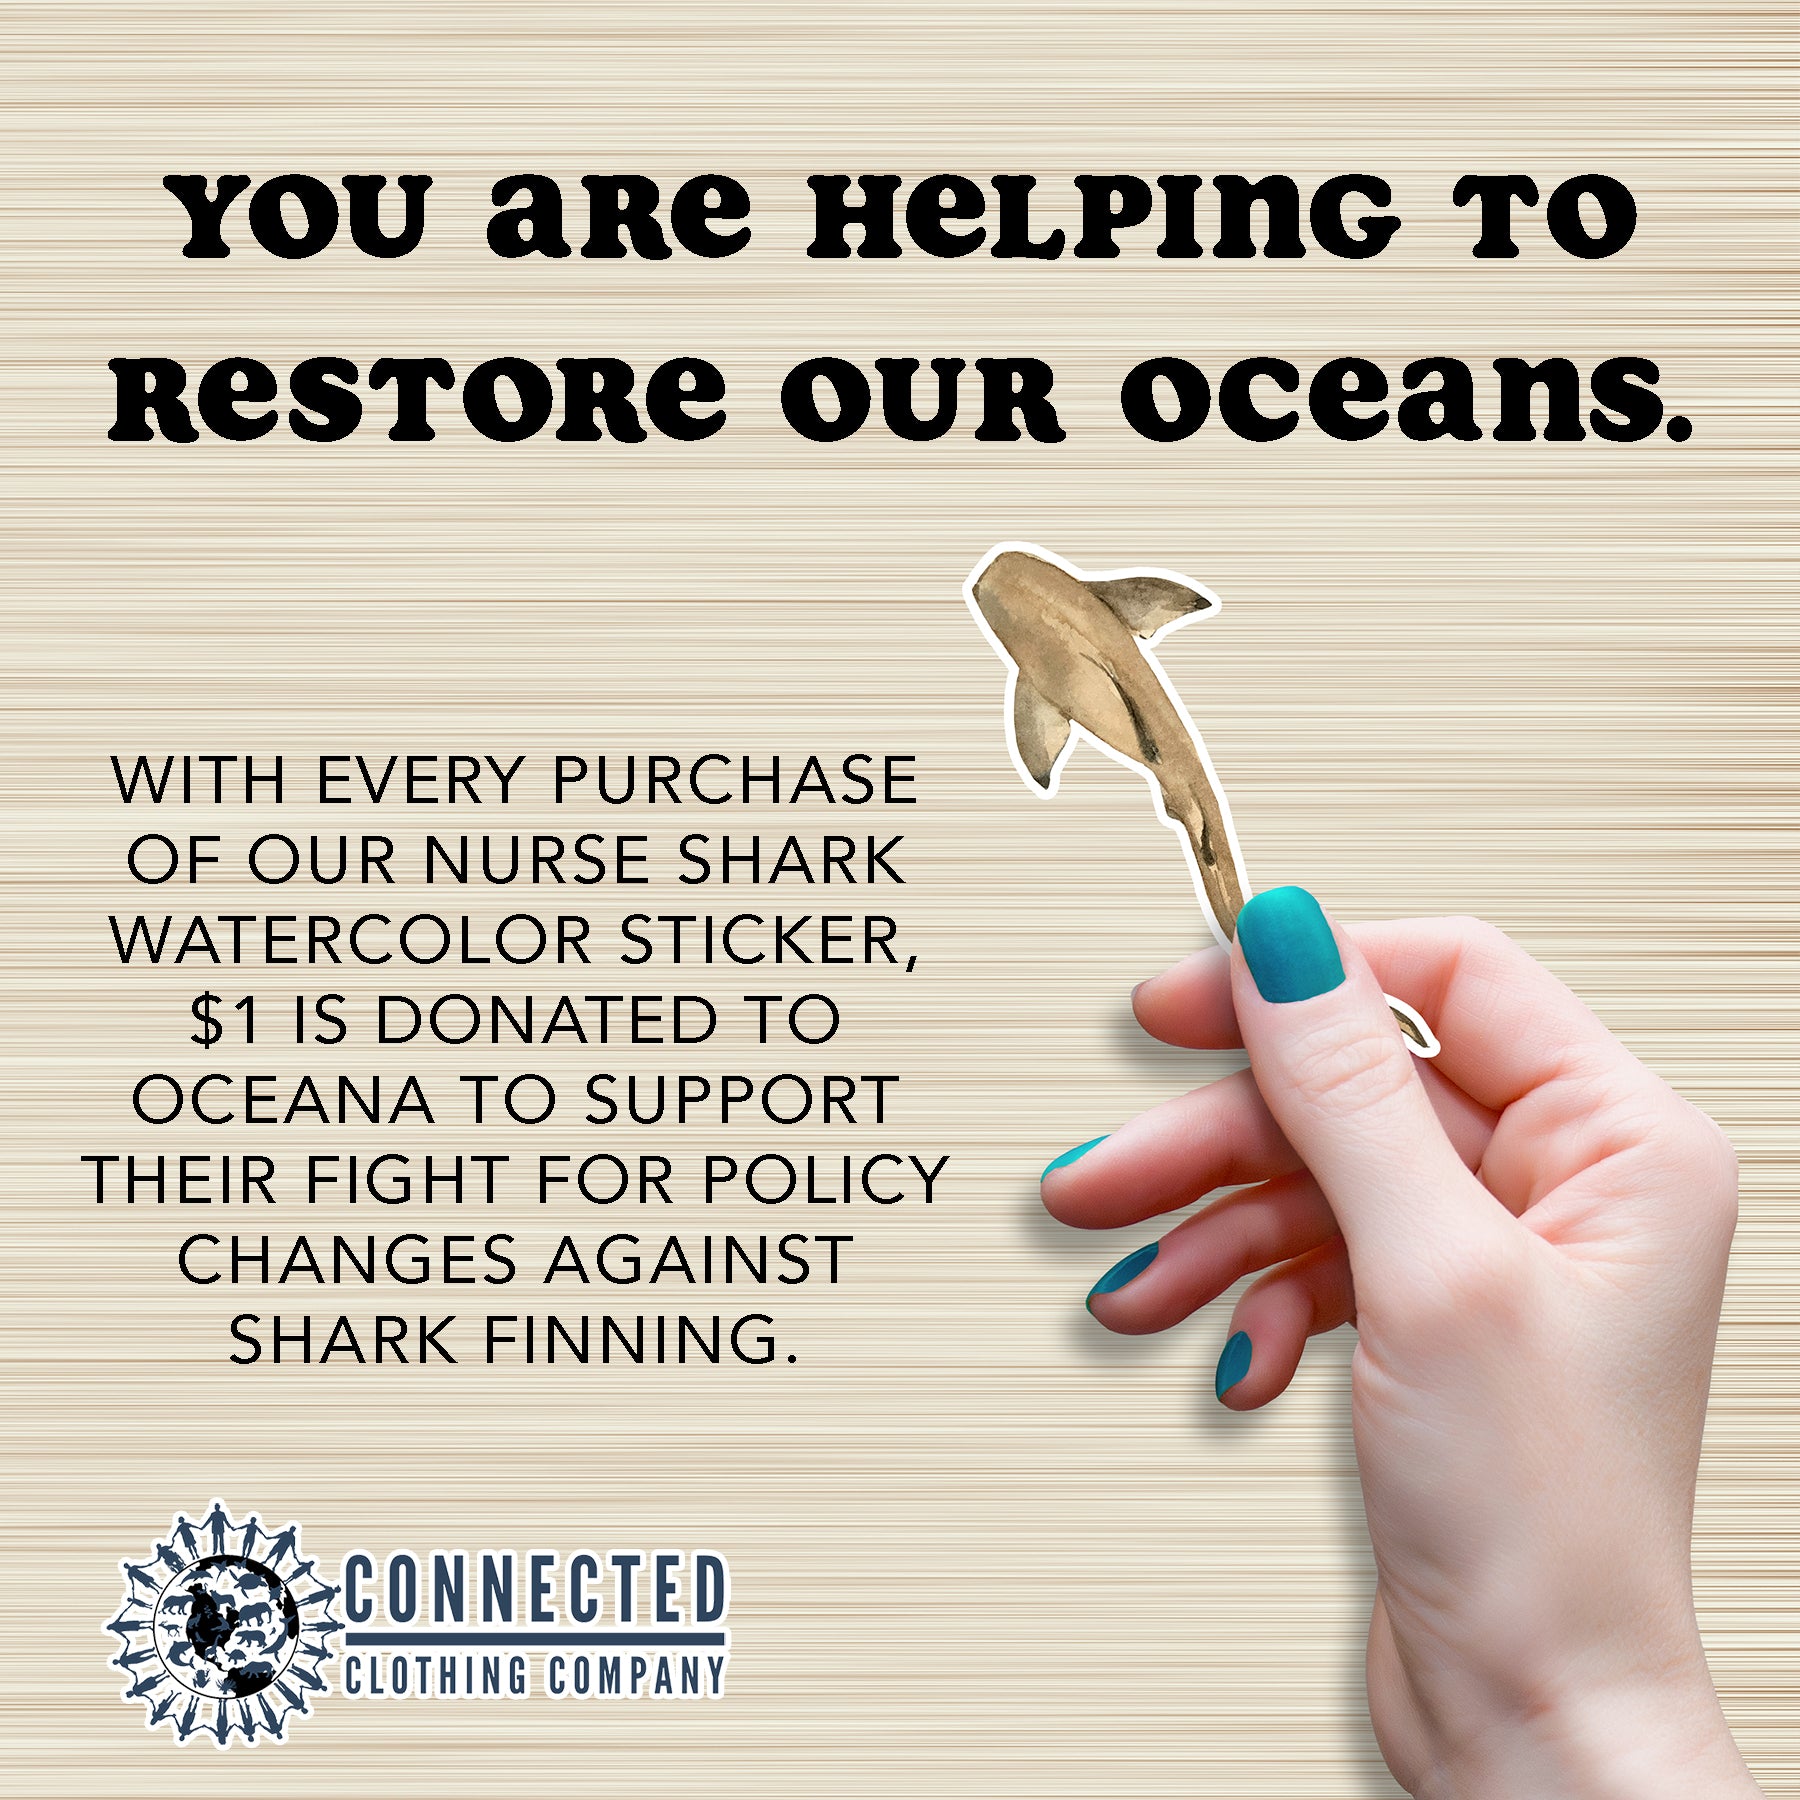 Hand Holding Nurse Shark Watercolor Sticker - "You are helping to restore our oceans. With every purchase of our nurse shark watercolor sticker, $1 is donated to oceana to support their fight for policy changes against shark finning." - sweetsherriloudesigns - Ethical and Sustainable Apparel - portion of profits donated to shark conservation